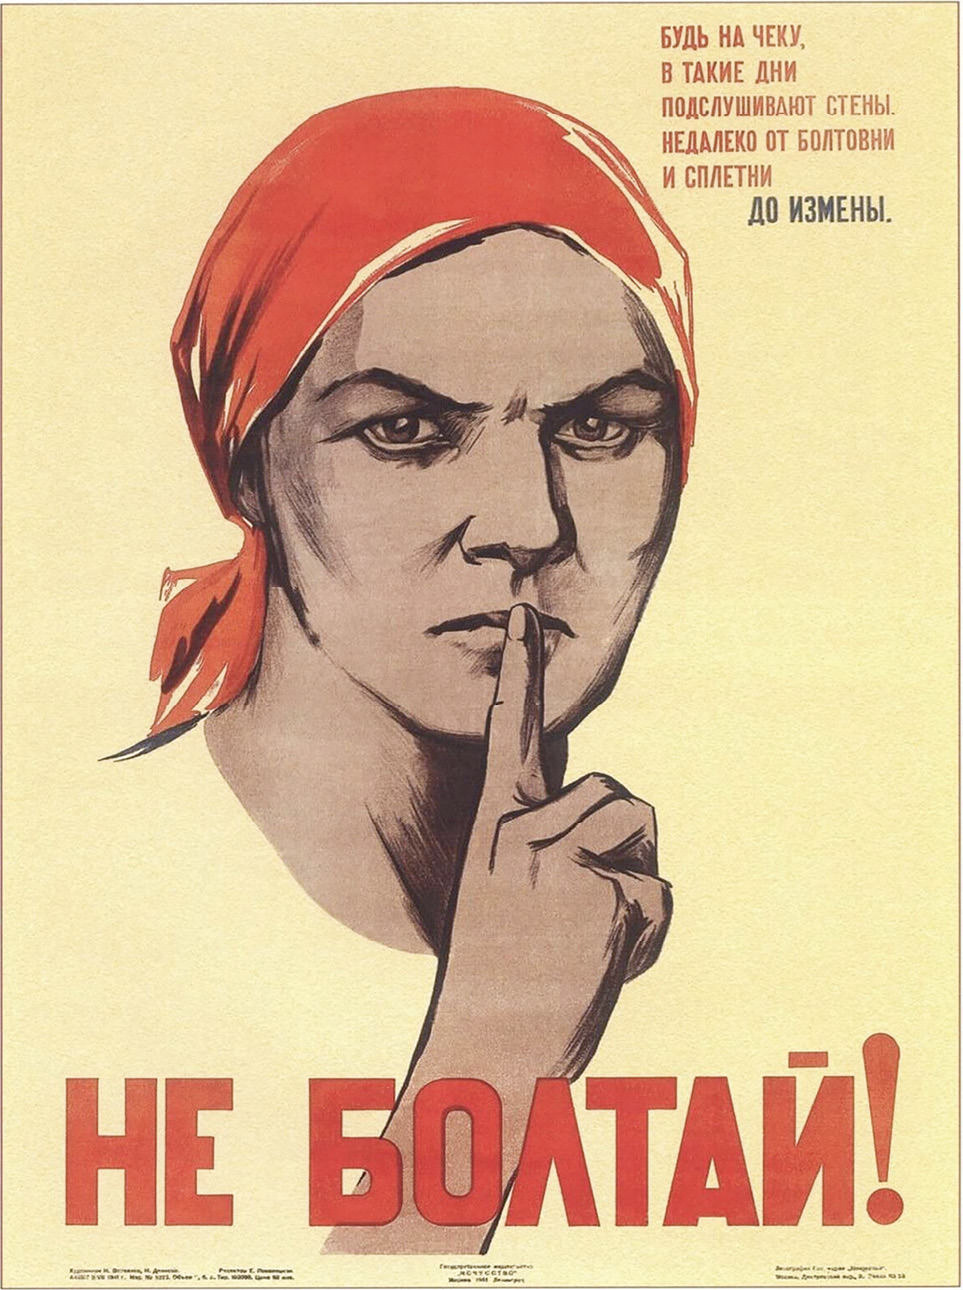 Famous Soviet poster about not chatting.